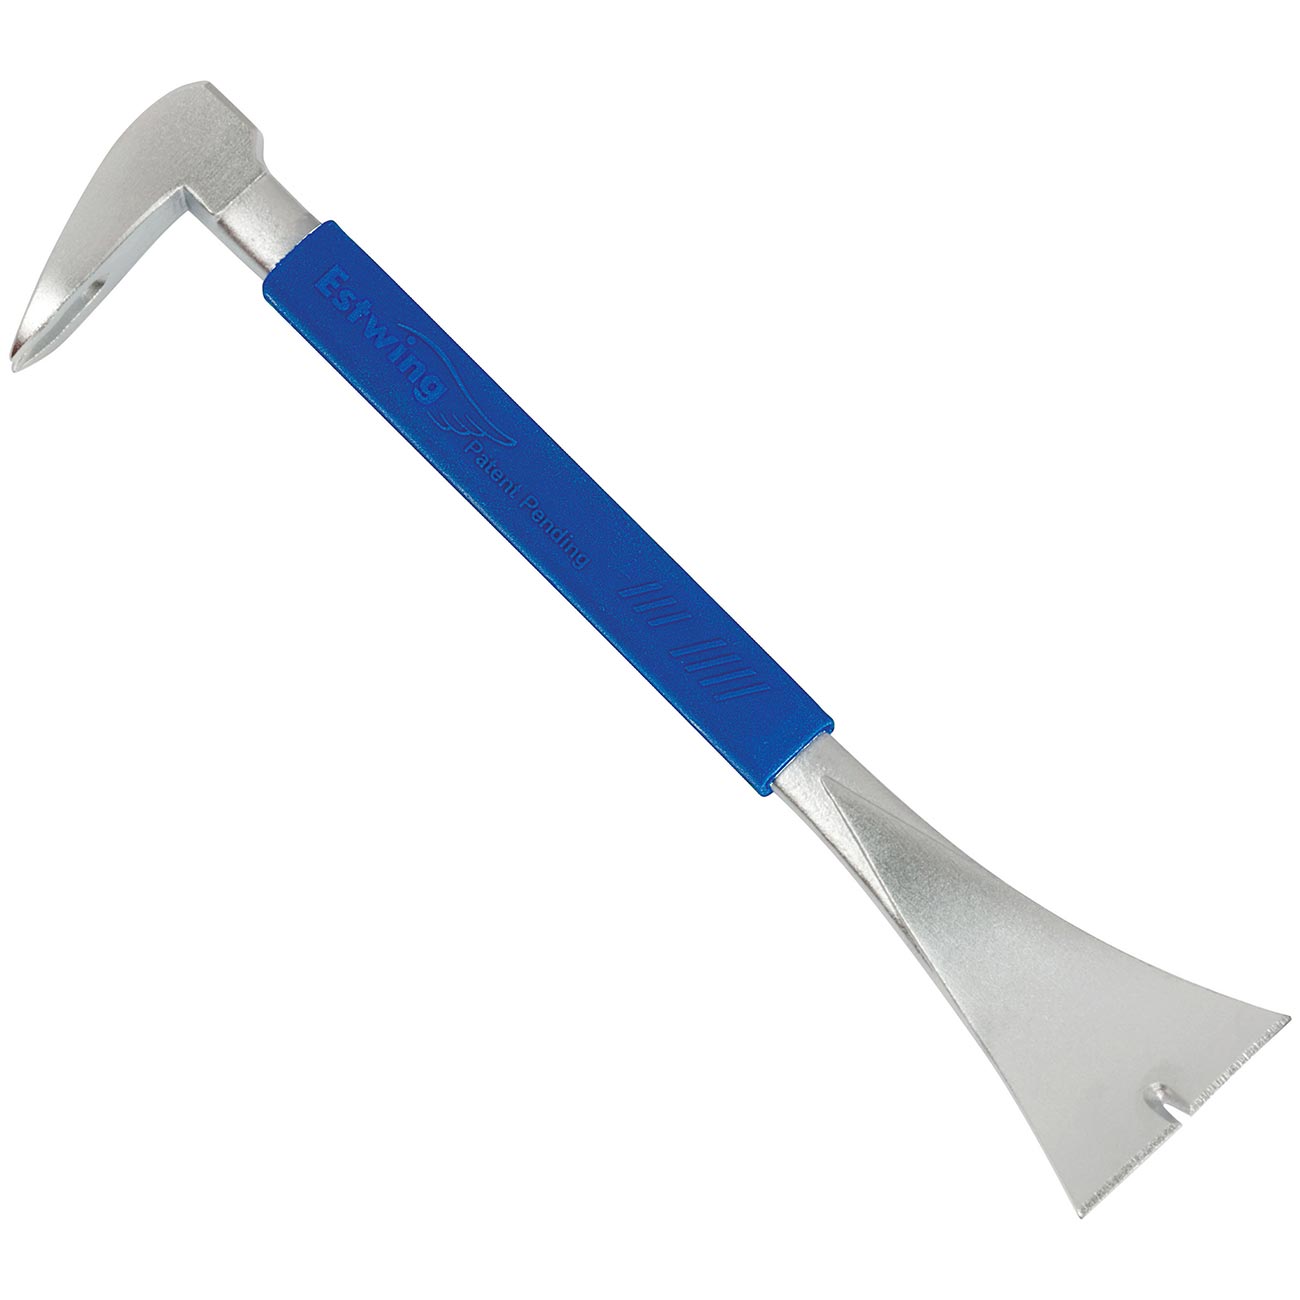 Estwing 10" Pro Molding Puller with Blue Cushion Grip